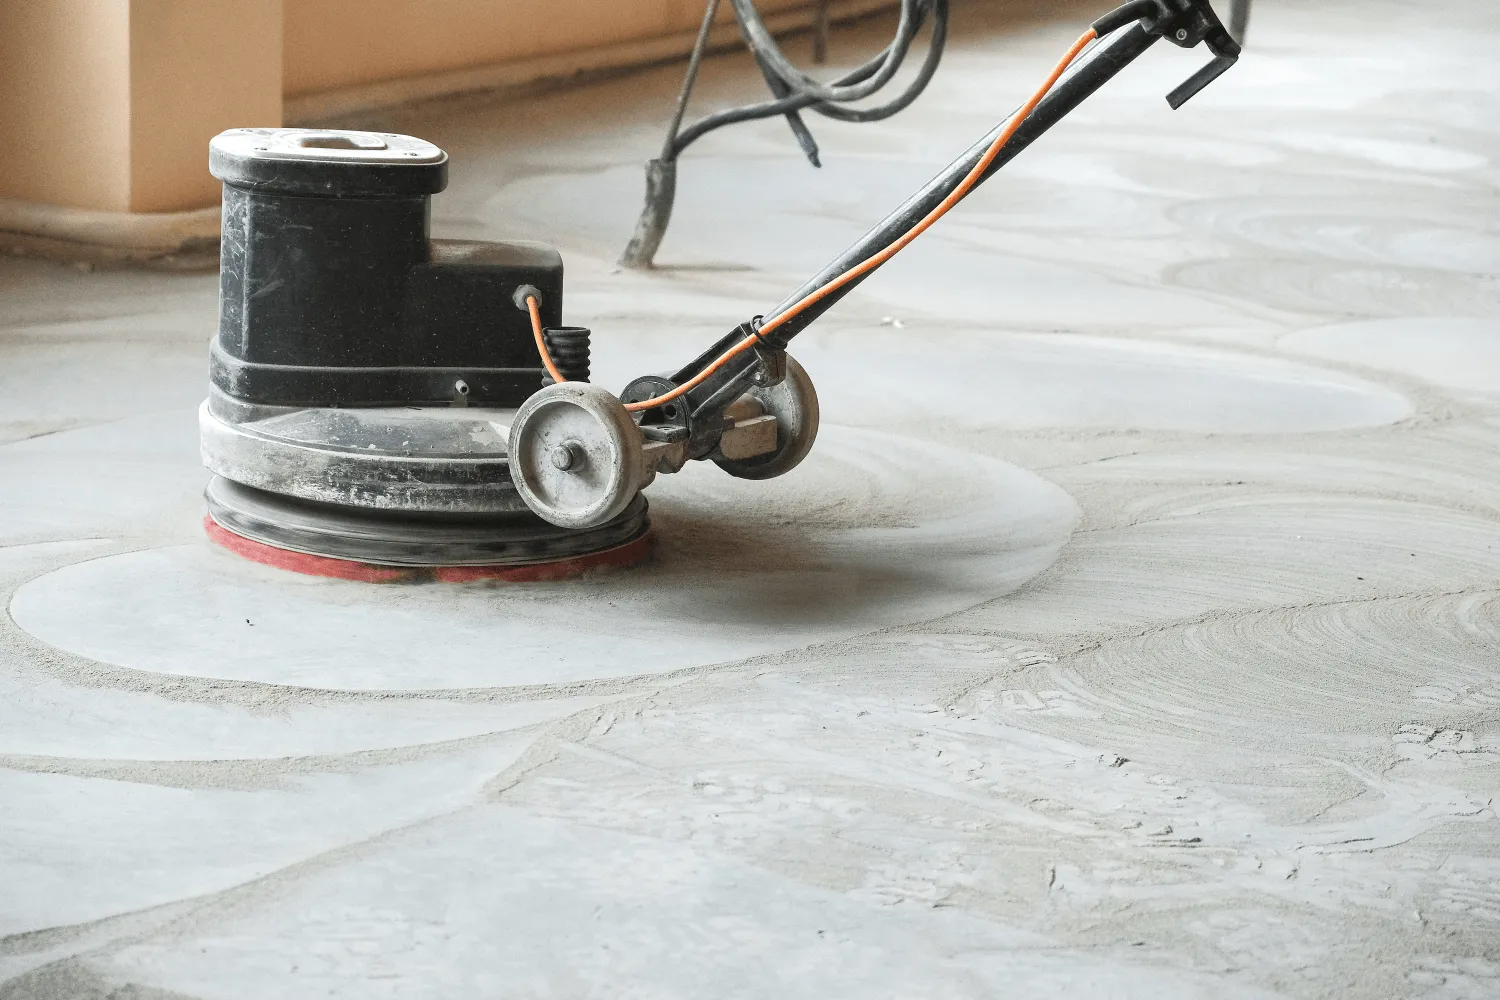 A floor polishing machine smooths a concrete surface at Lauderdale Concrete in Pembroke Pines, FL. The machine has a round base and an attached handle with cords running from it. The floor shows swirling patterns from the polishing process, creating a clean and finished look.